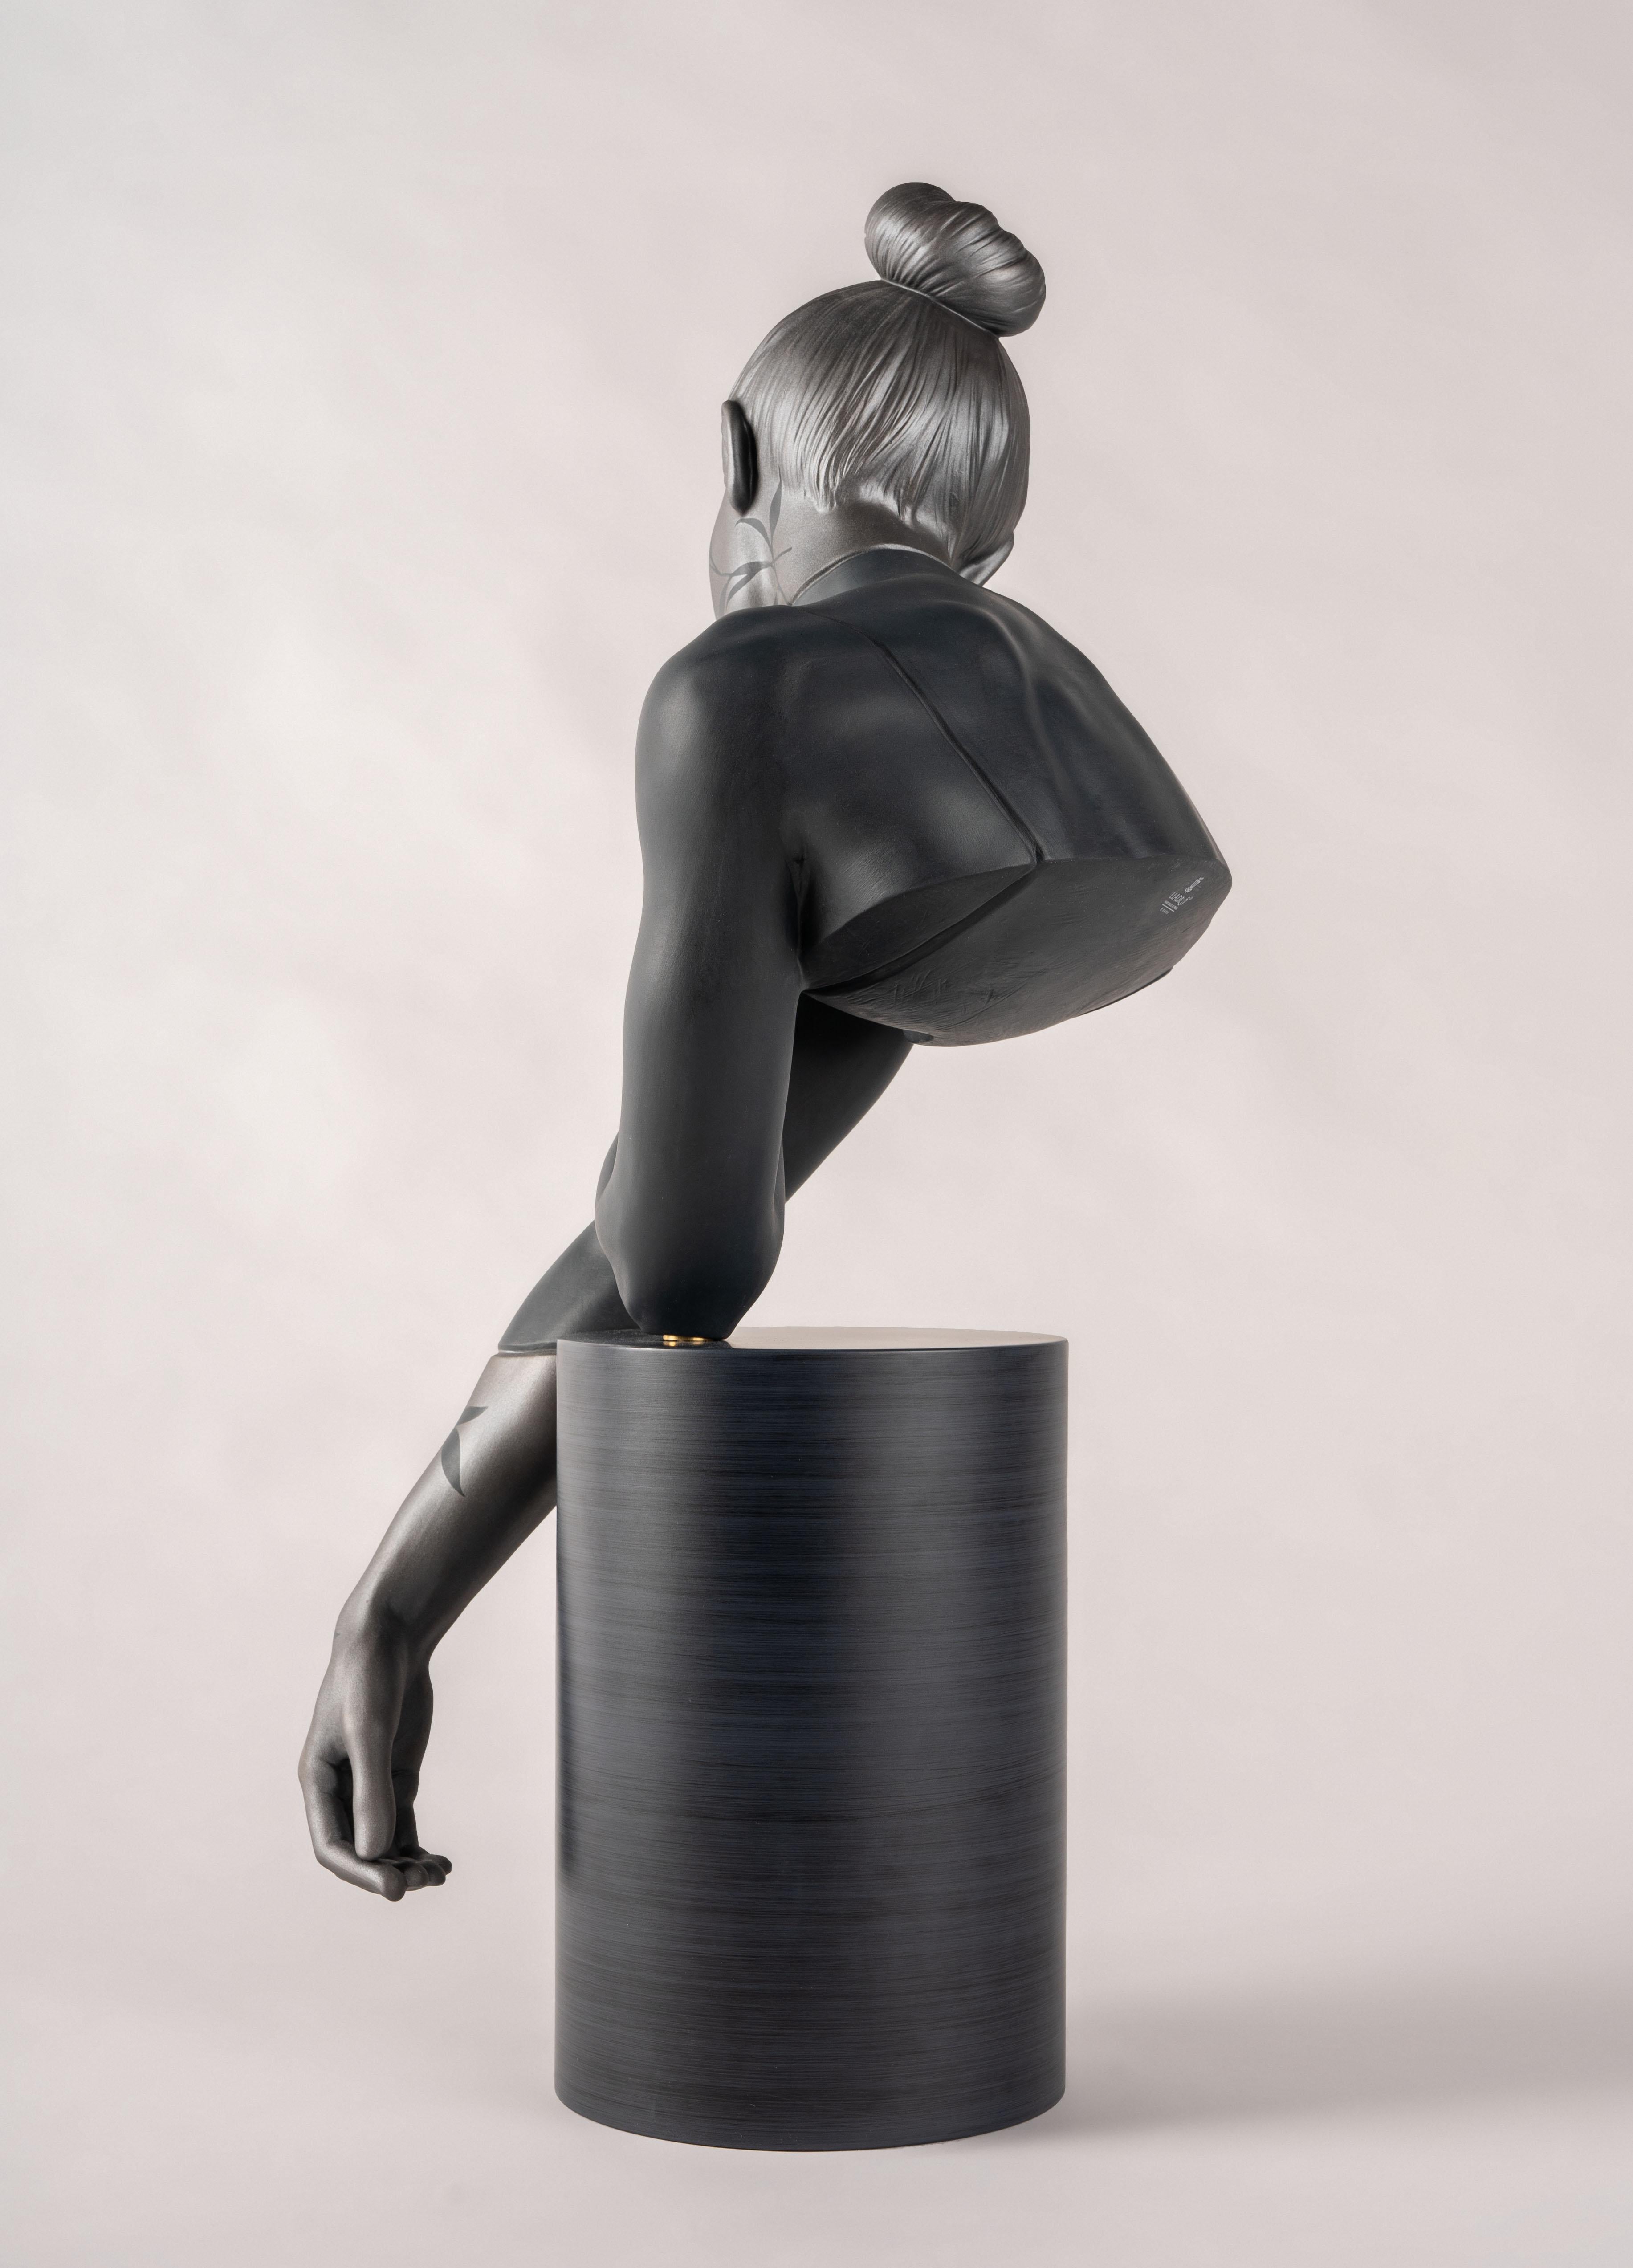 Porcelain sculpture inspired by the connection between humans and nature. This female porcelain bust portrays a woman in a pensive inner-looking pose. It reminds us of the essential bond between woman and nature, our responsibility for looking after